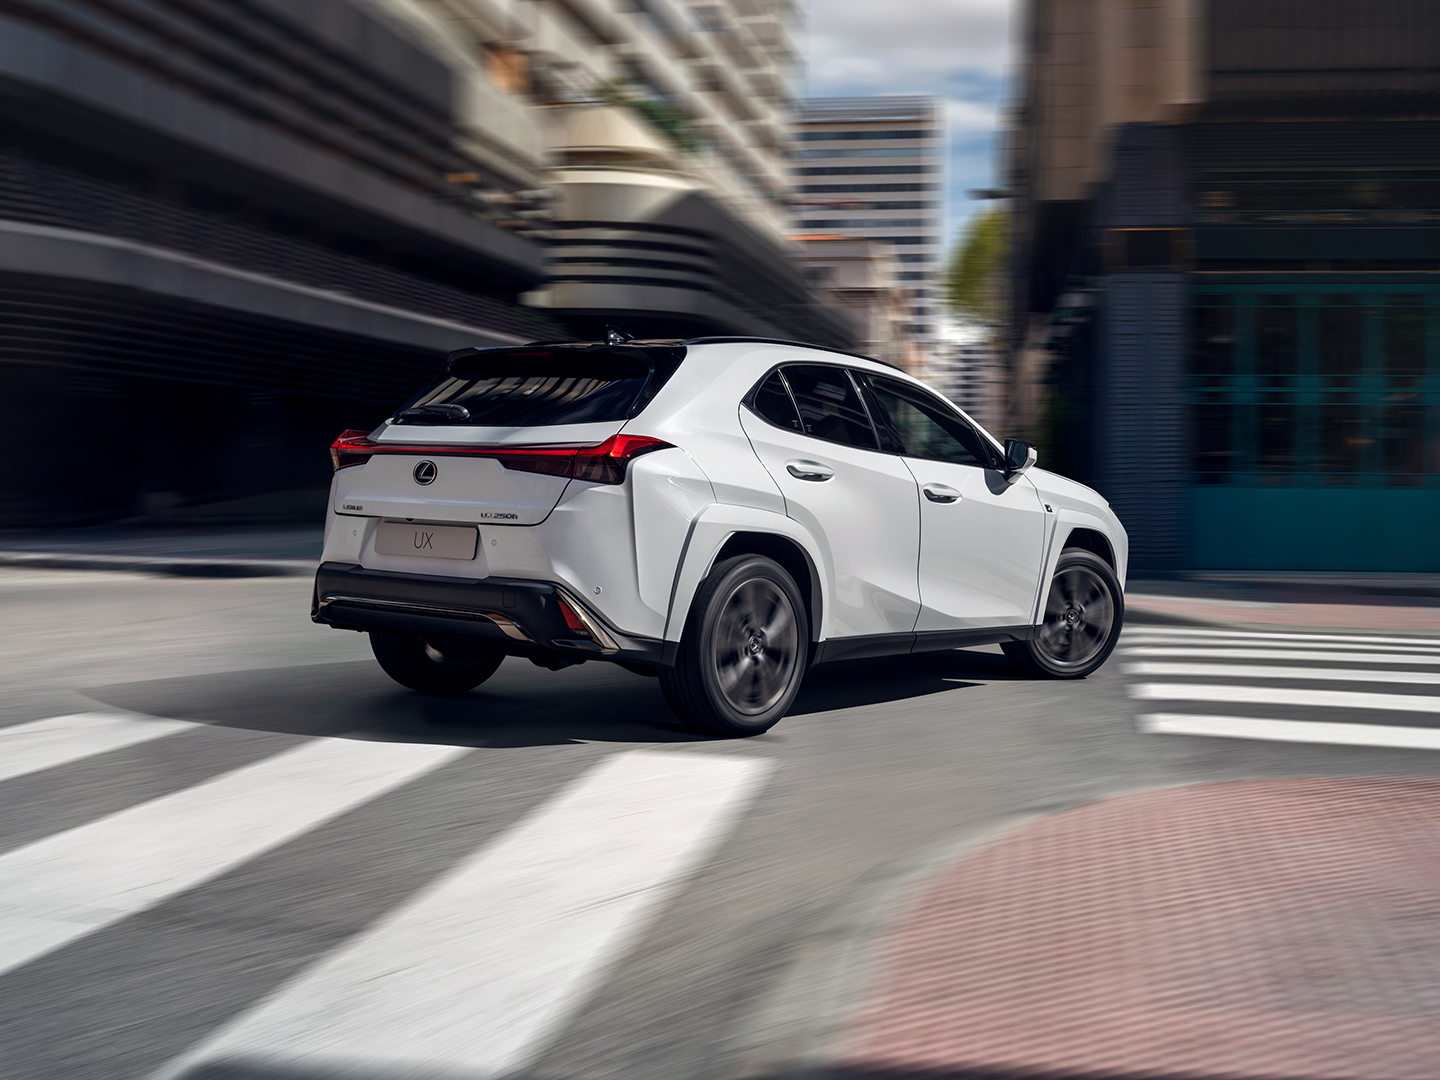 A Lexus UX driving round a corner in a town